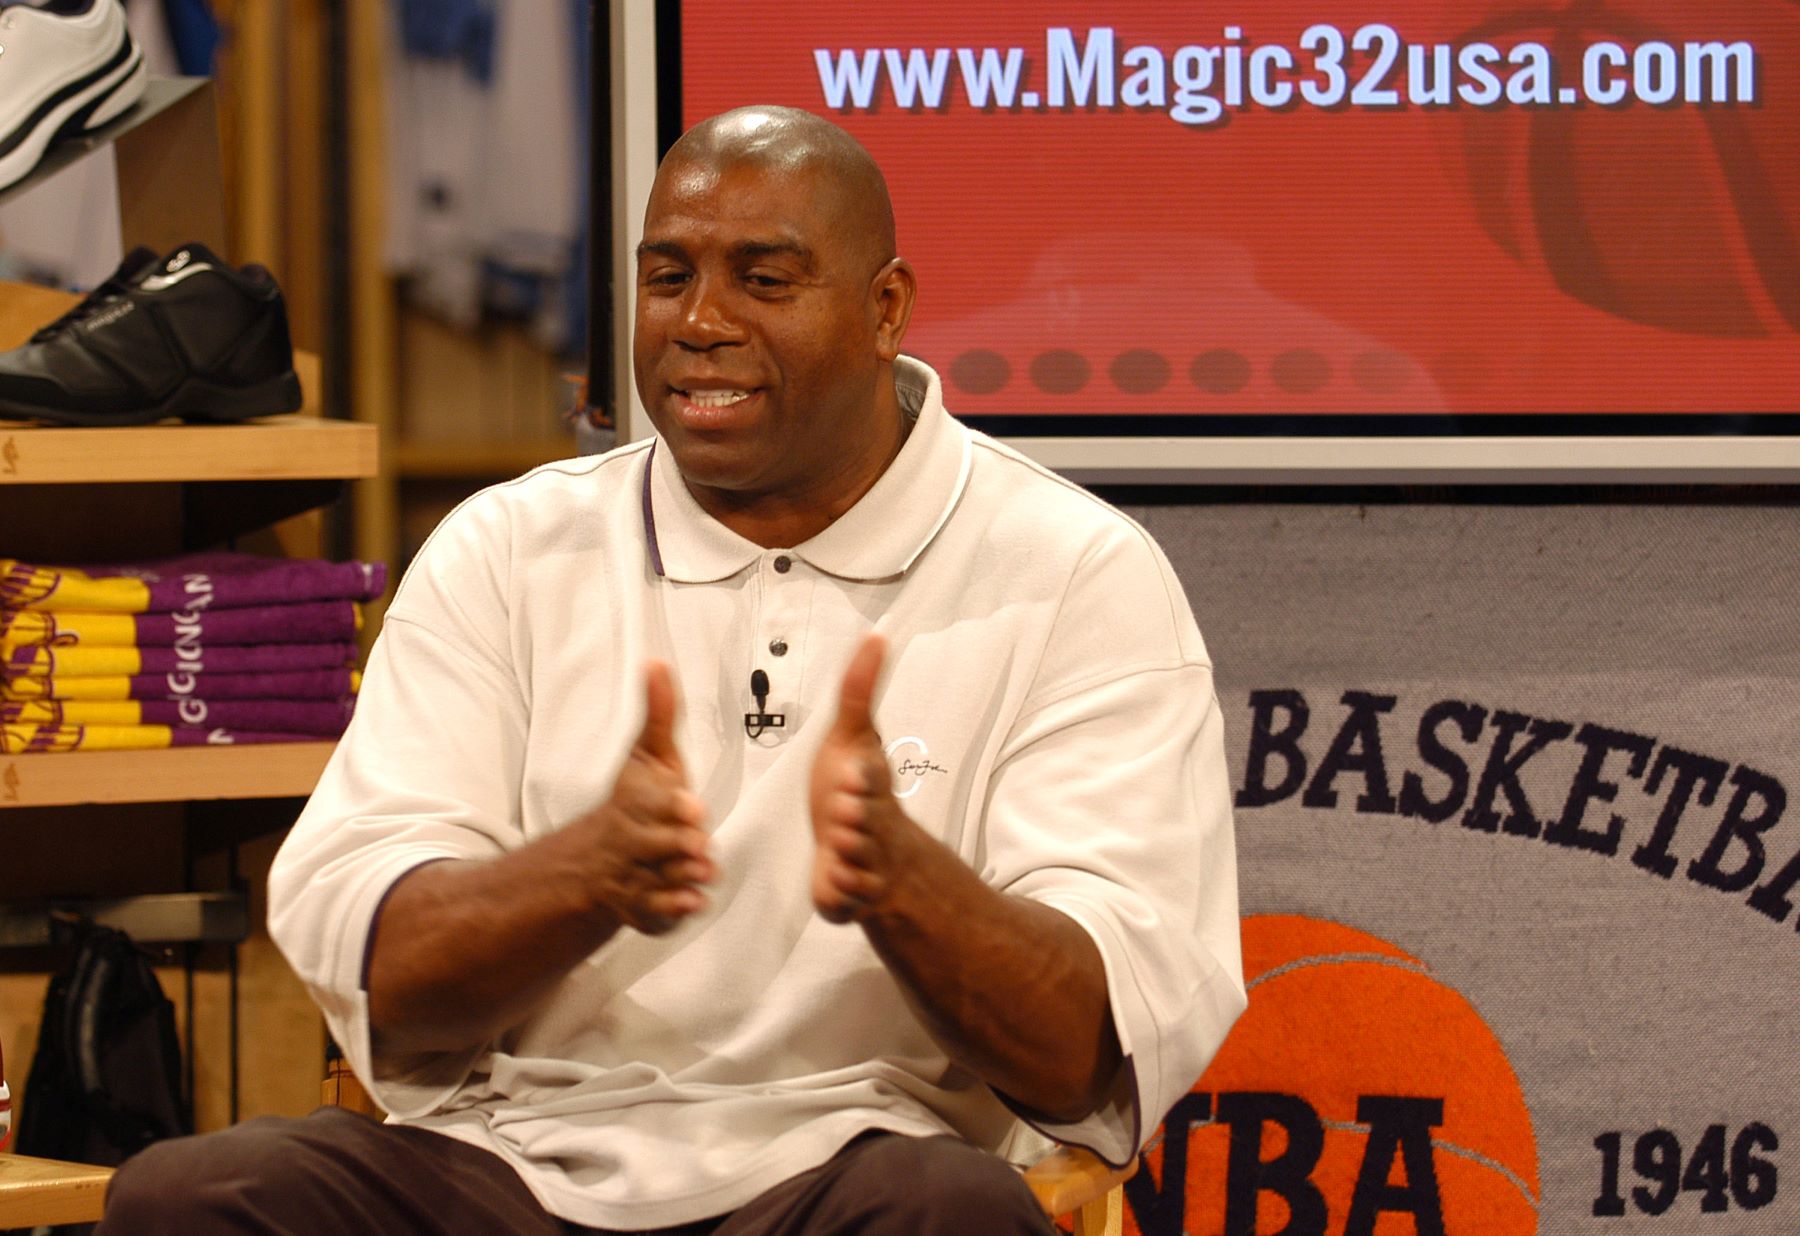 Magic Johnson launched its Magic32 footwear and apparel line in the NBA Store after working once with Converse